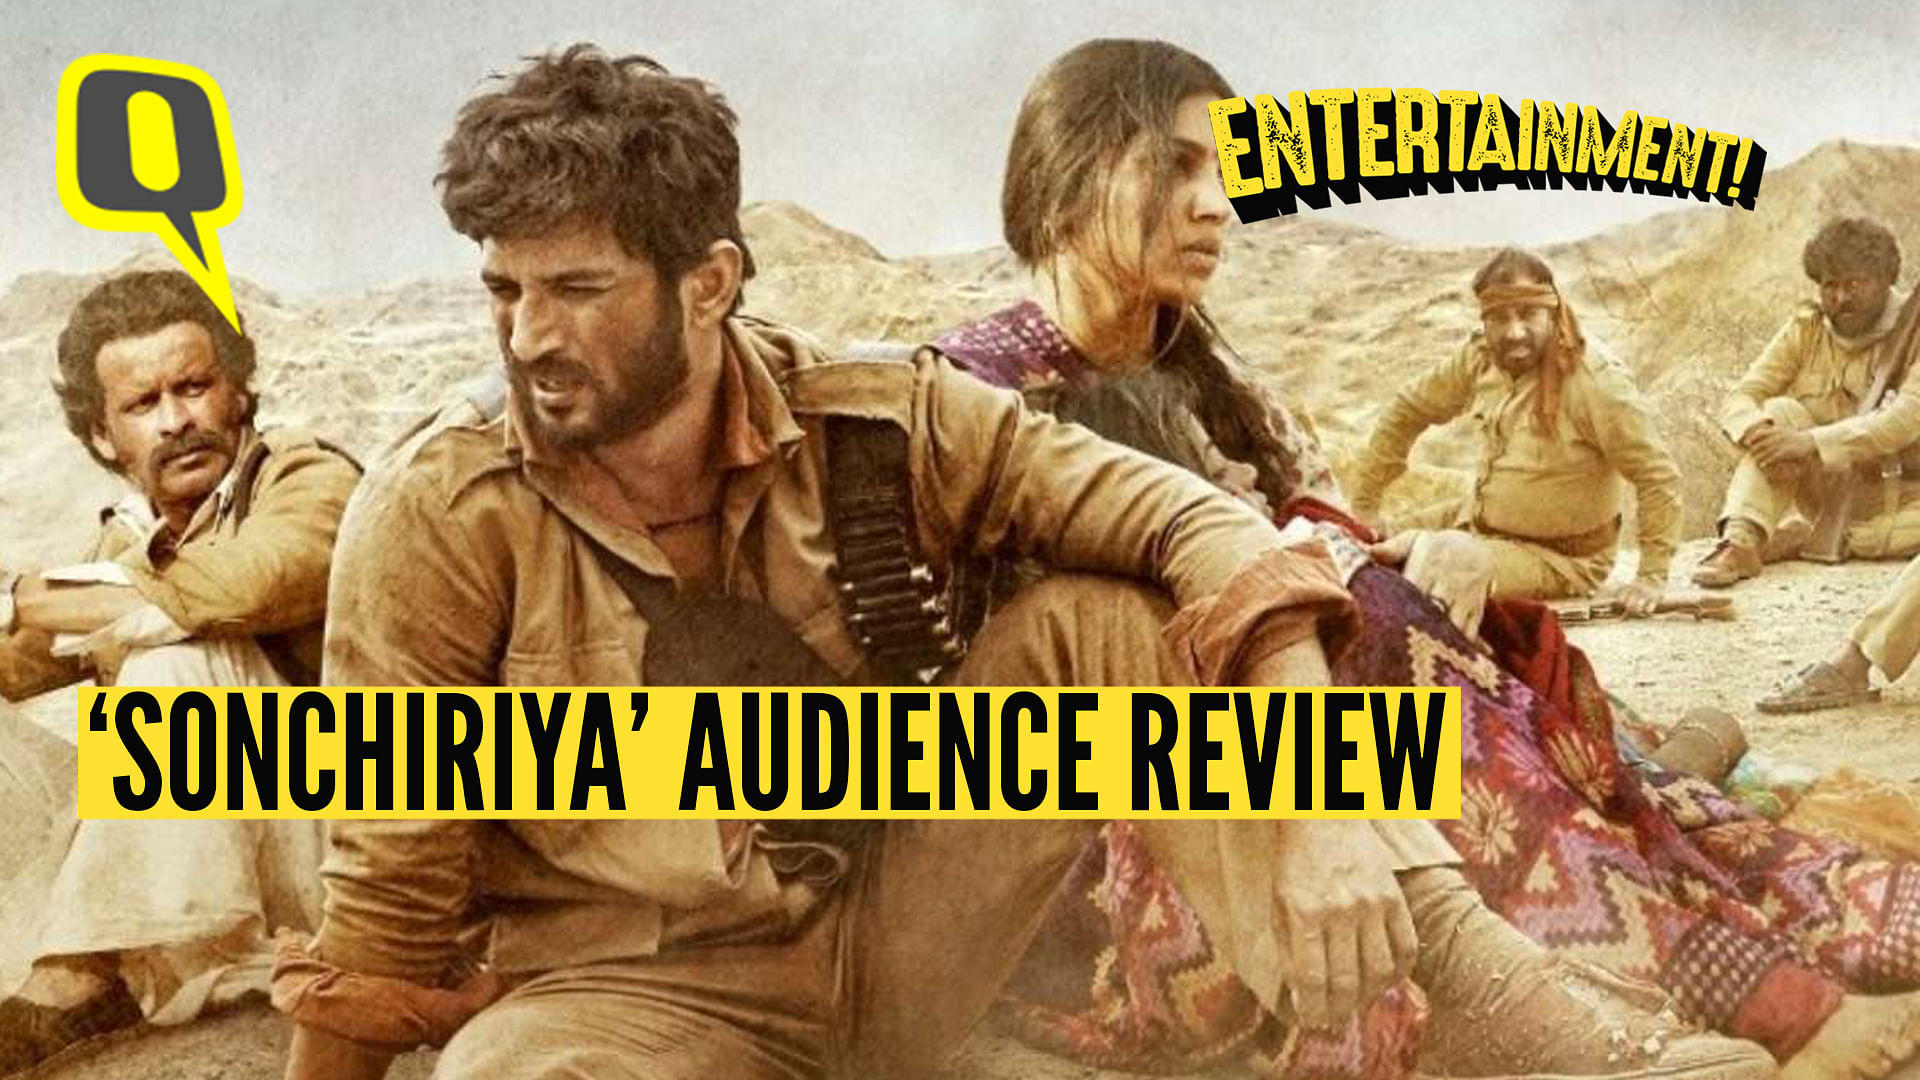 Here’s what audiences thought of <i>Sonchiriya</i>.